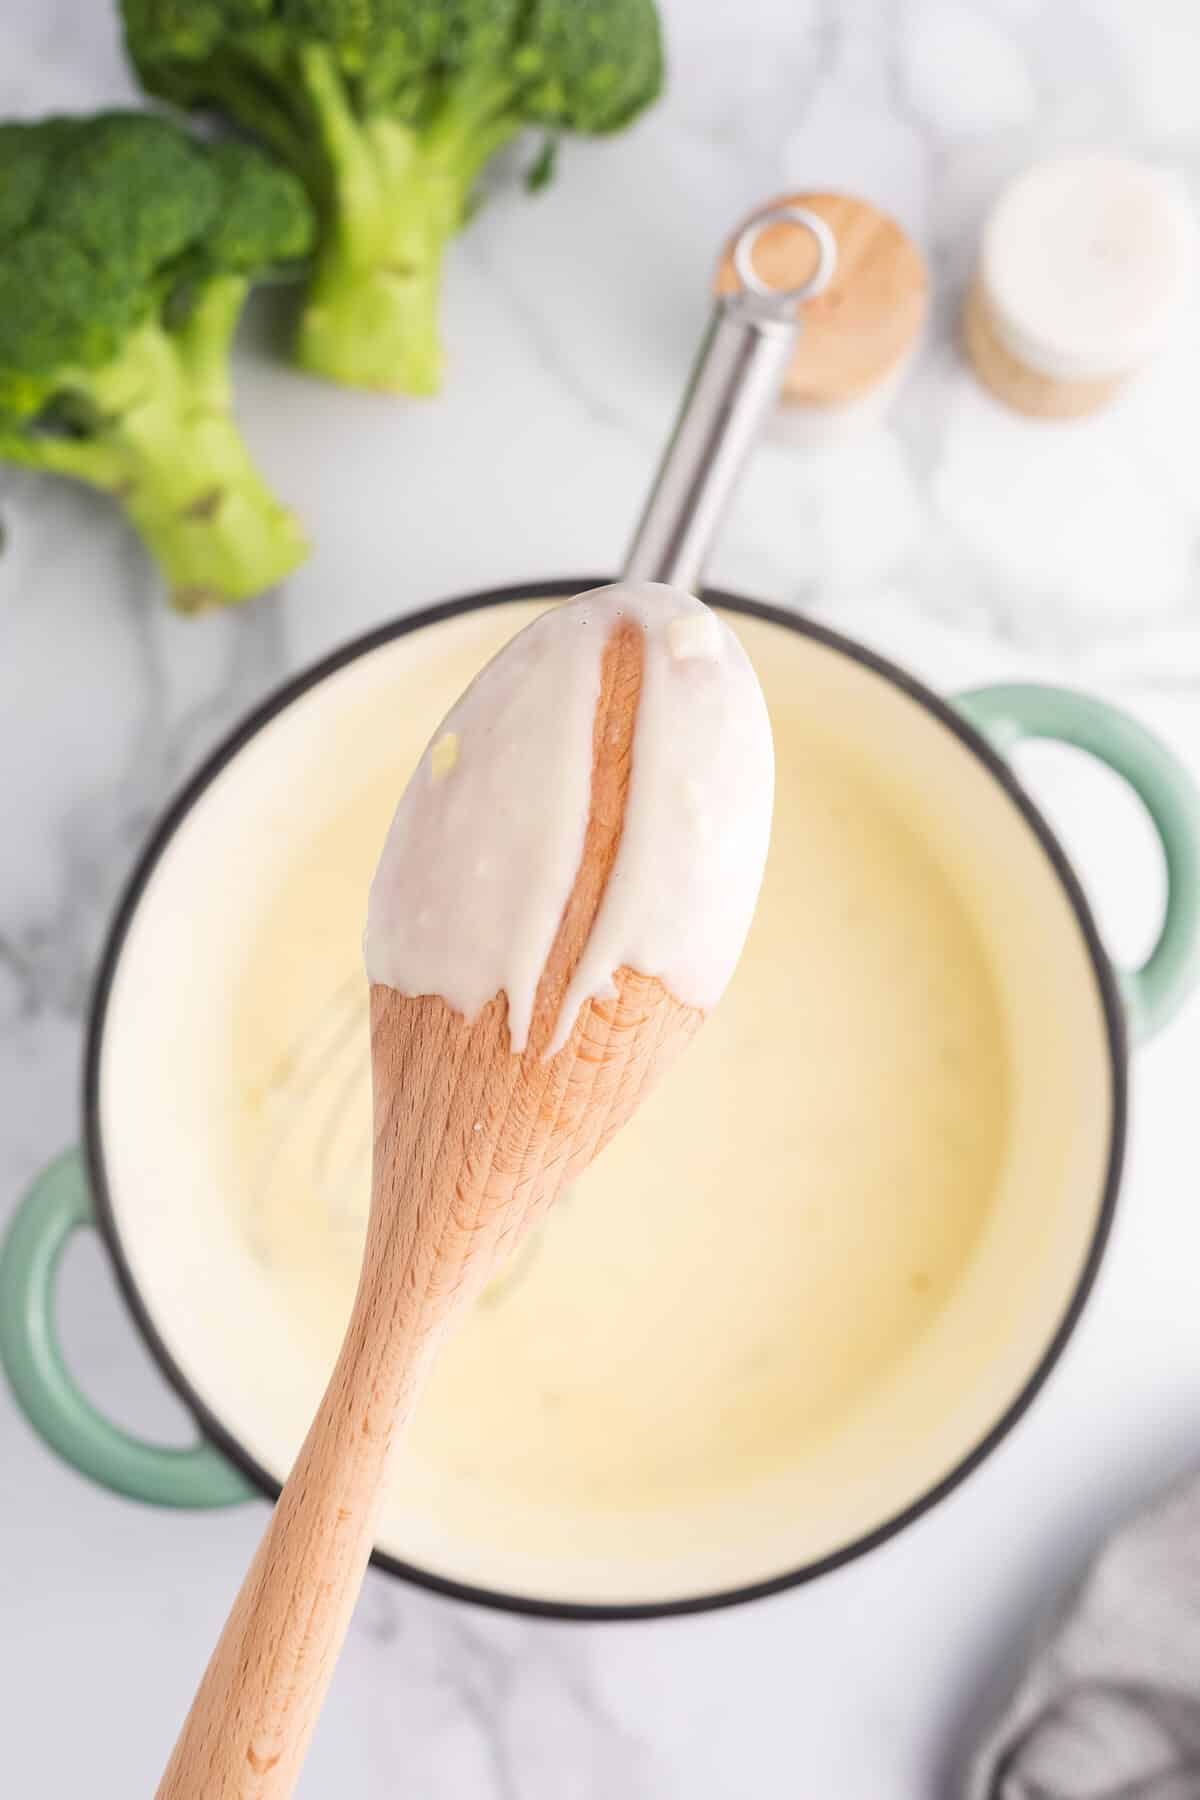 Béchamel sauce coating the back of a wooden spoon.